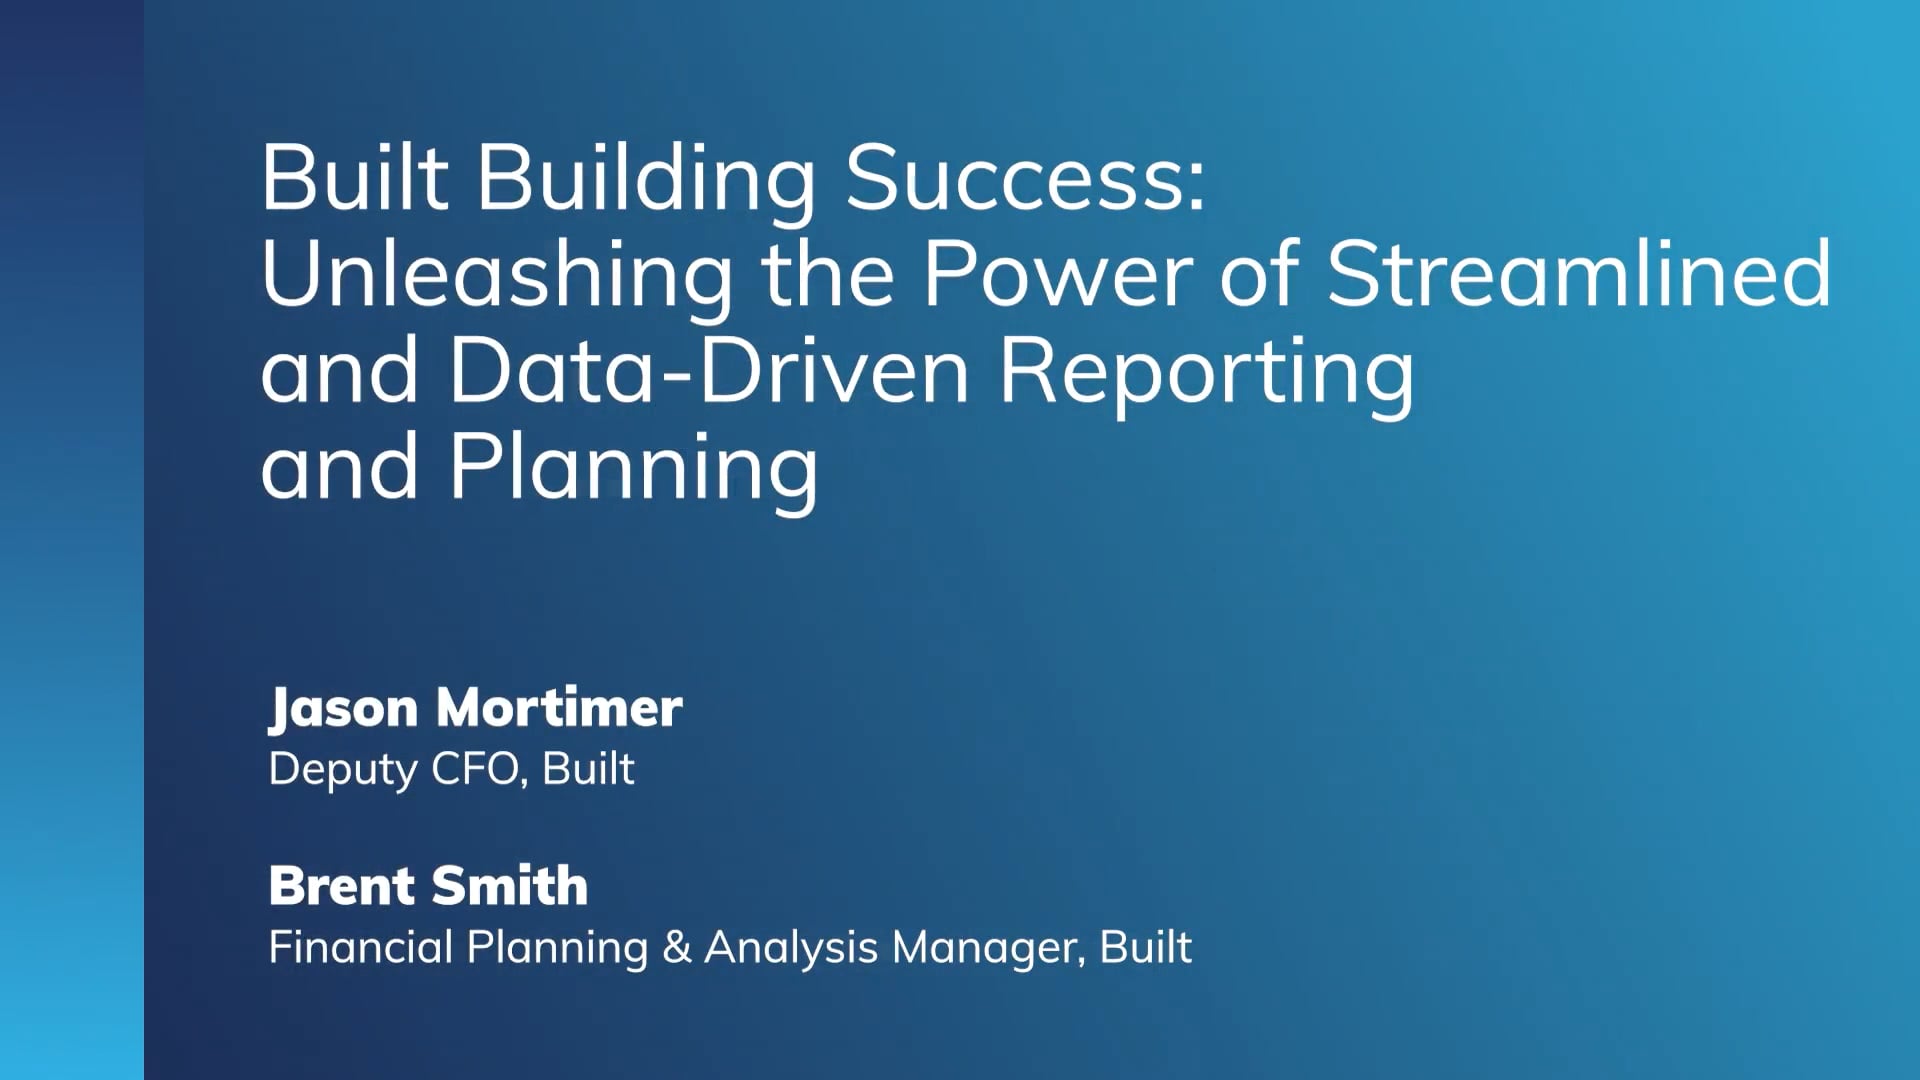 Board in Action: Built Building Success: Unleashing the Power of Streamlined and Data-Driven Reporting & Planning